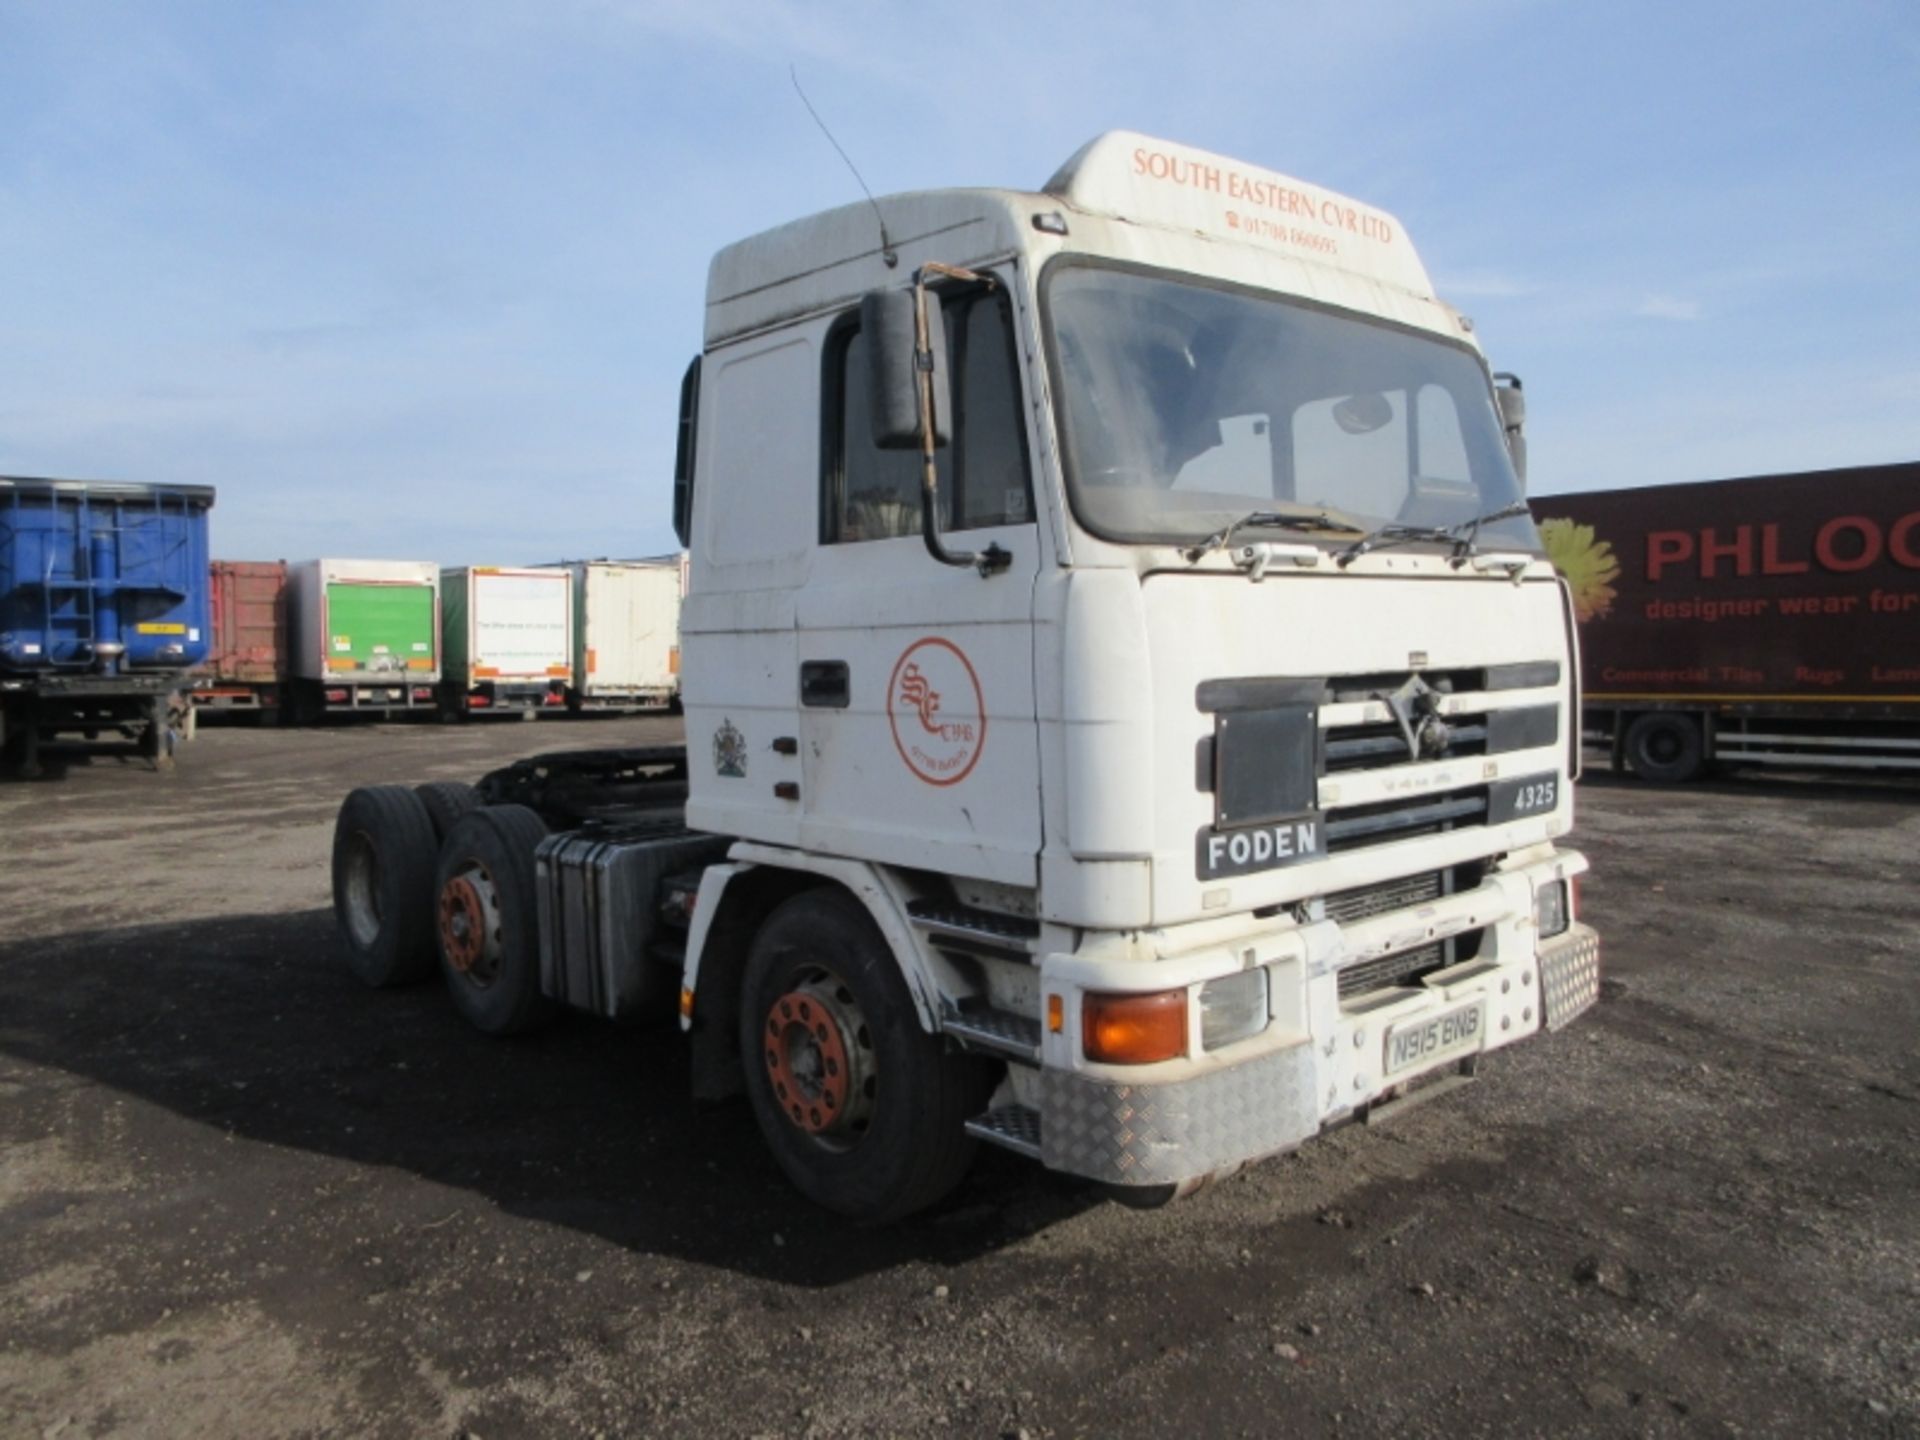 FODEN 4325 Sleeper Cab Diesel - VIN: 450430 - Year: 1996 - 022,000 km - 6x2 Unit, Tipping Gear **NON - Image 2 of 7